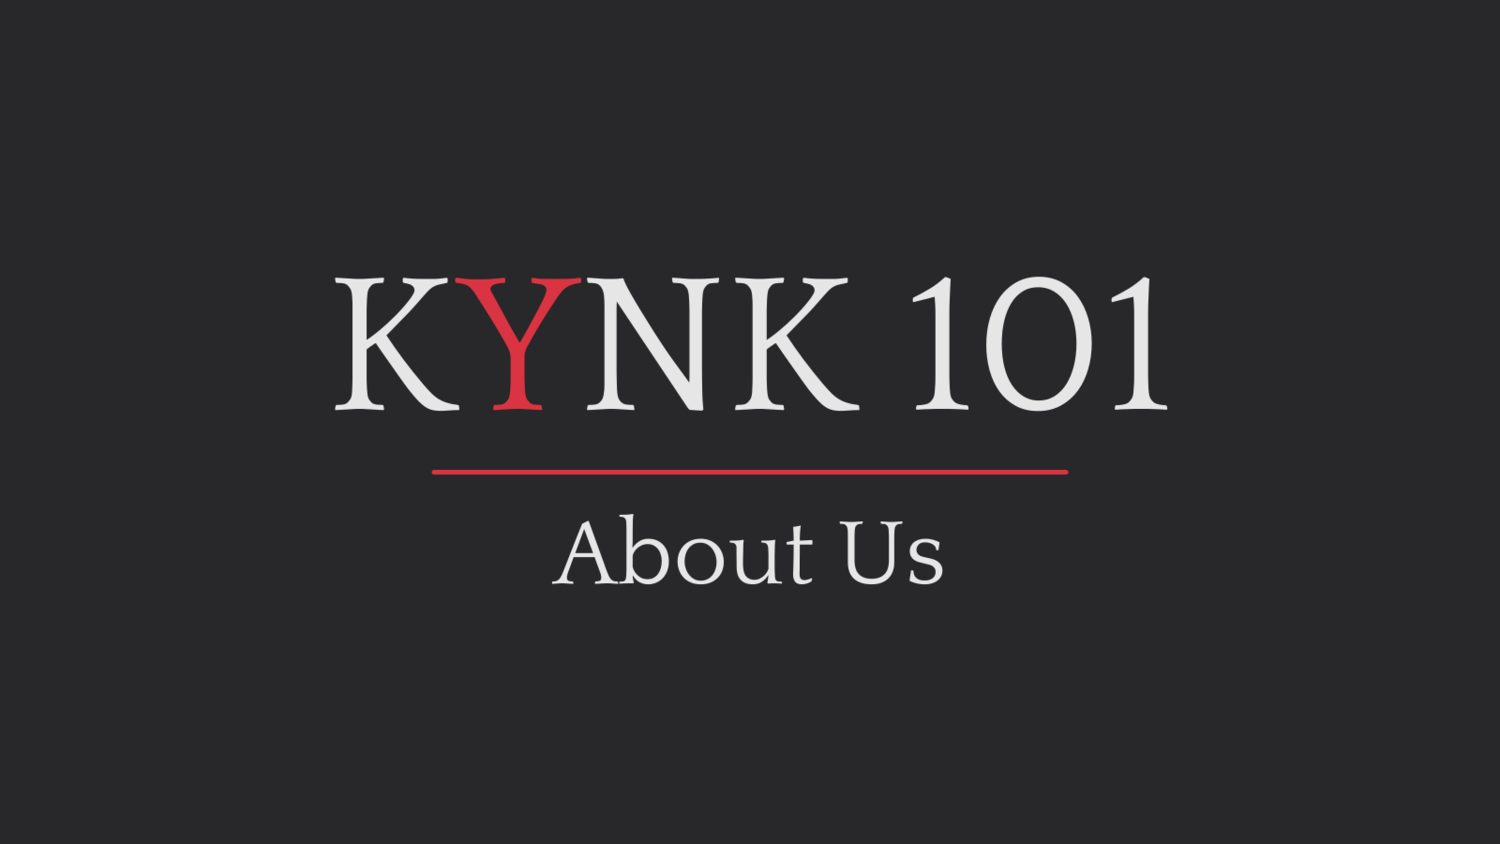 About Us — KYNK 101